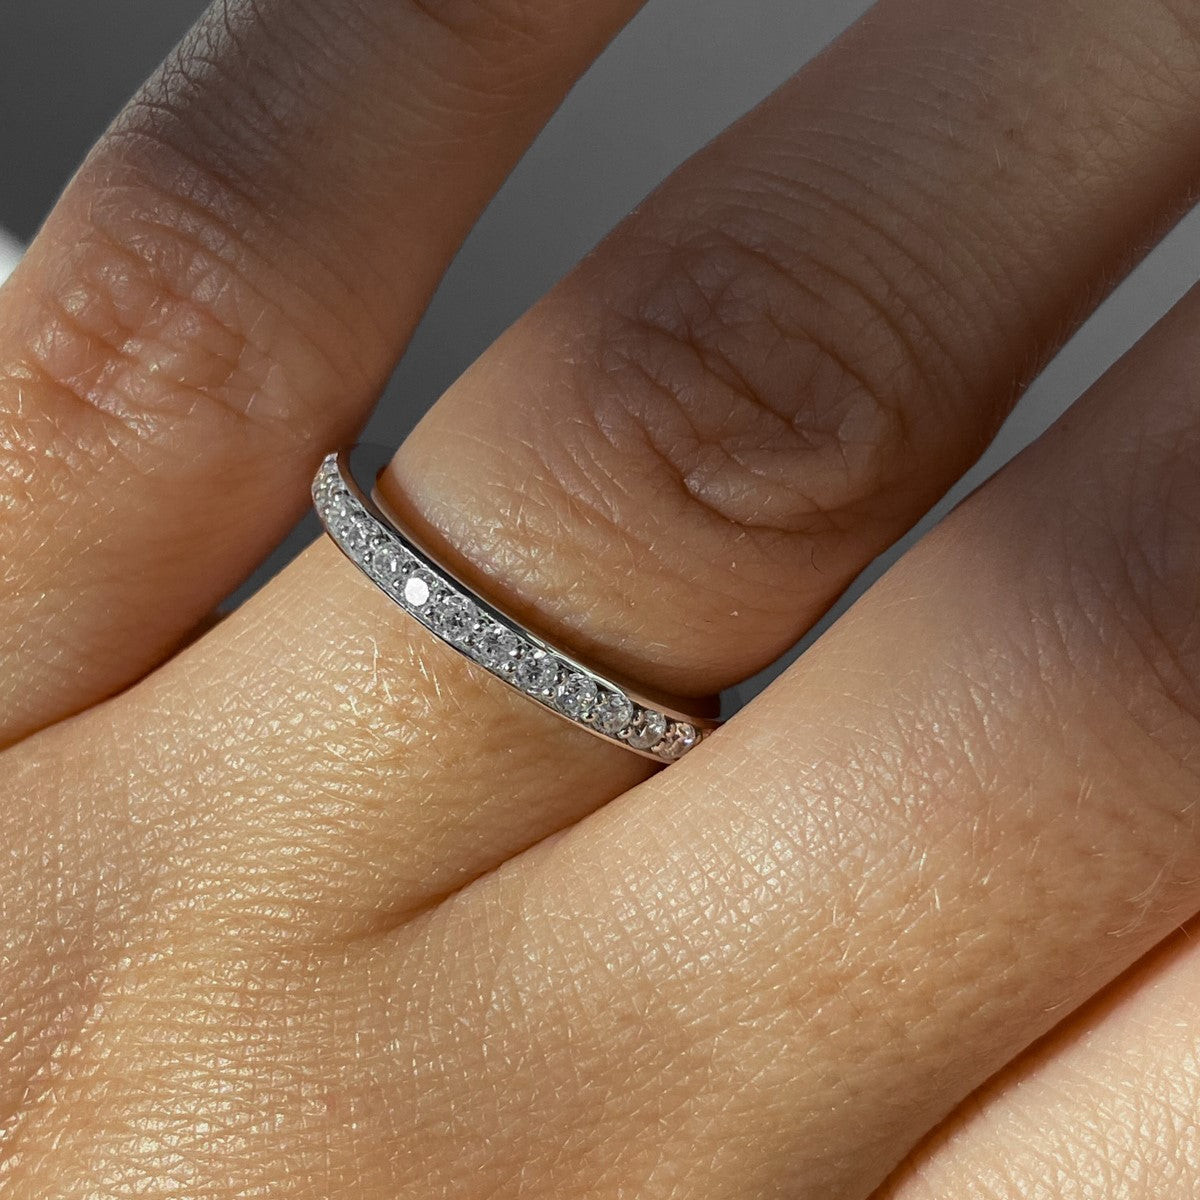 RING "MEMORIES" WITH A FULL CIRCLE OF MOISSANITE | SILVER